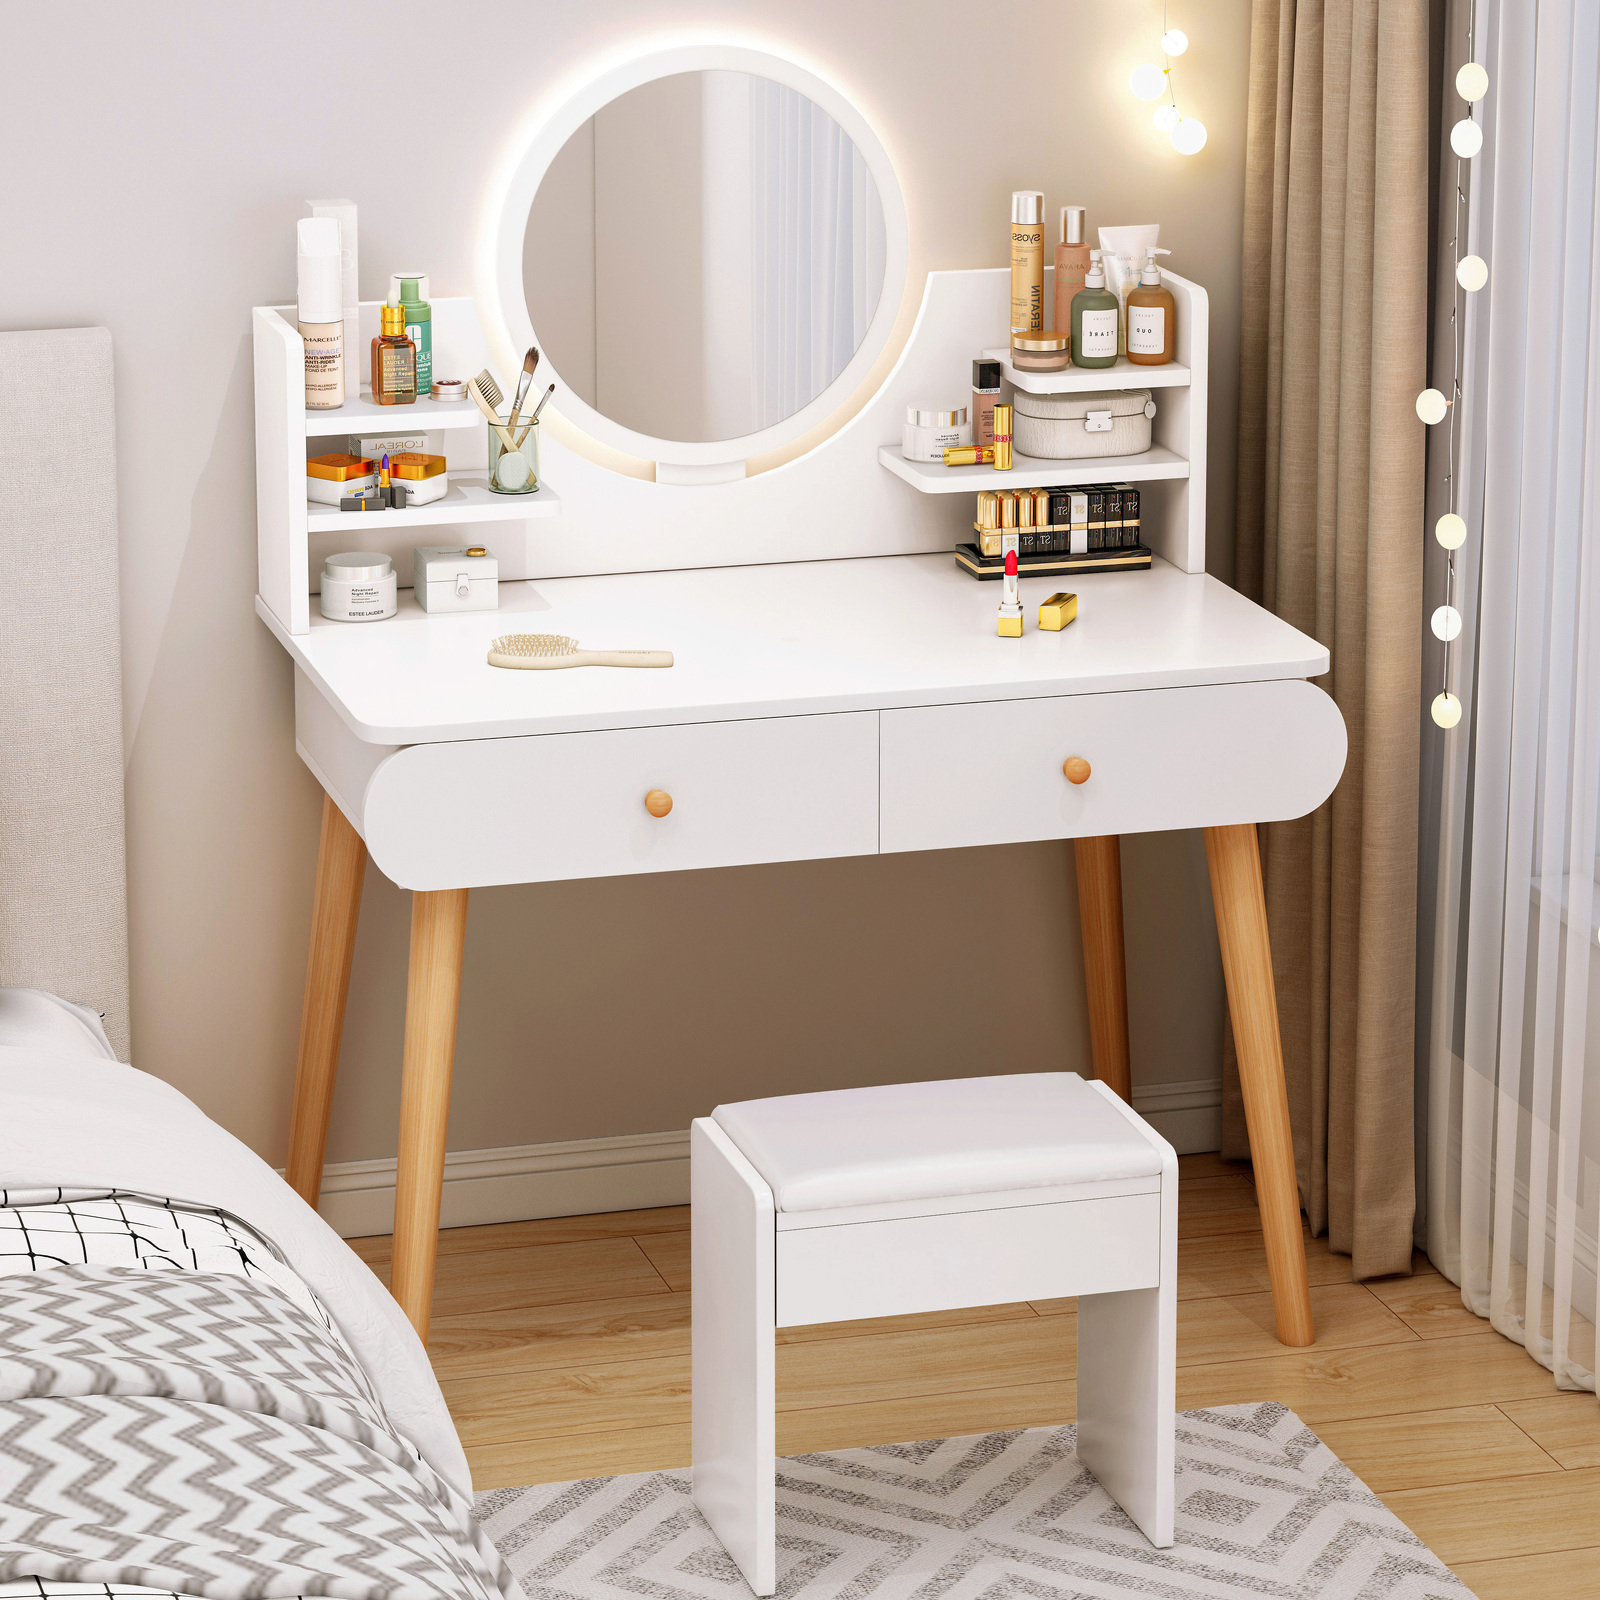 LED Luminous Beauty Dresser Vanity Table with Mirror, Stool and Storage Drawers Set